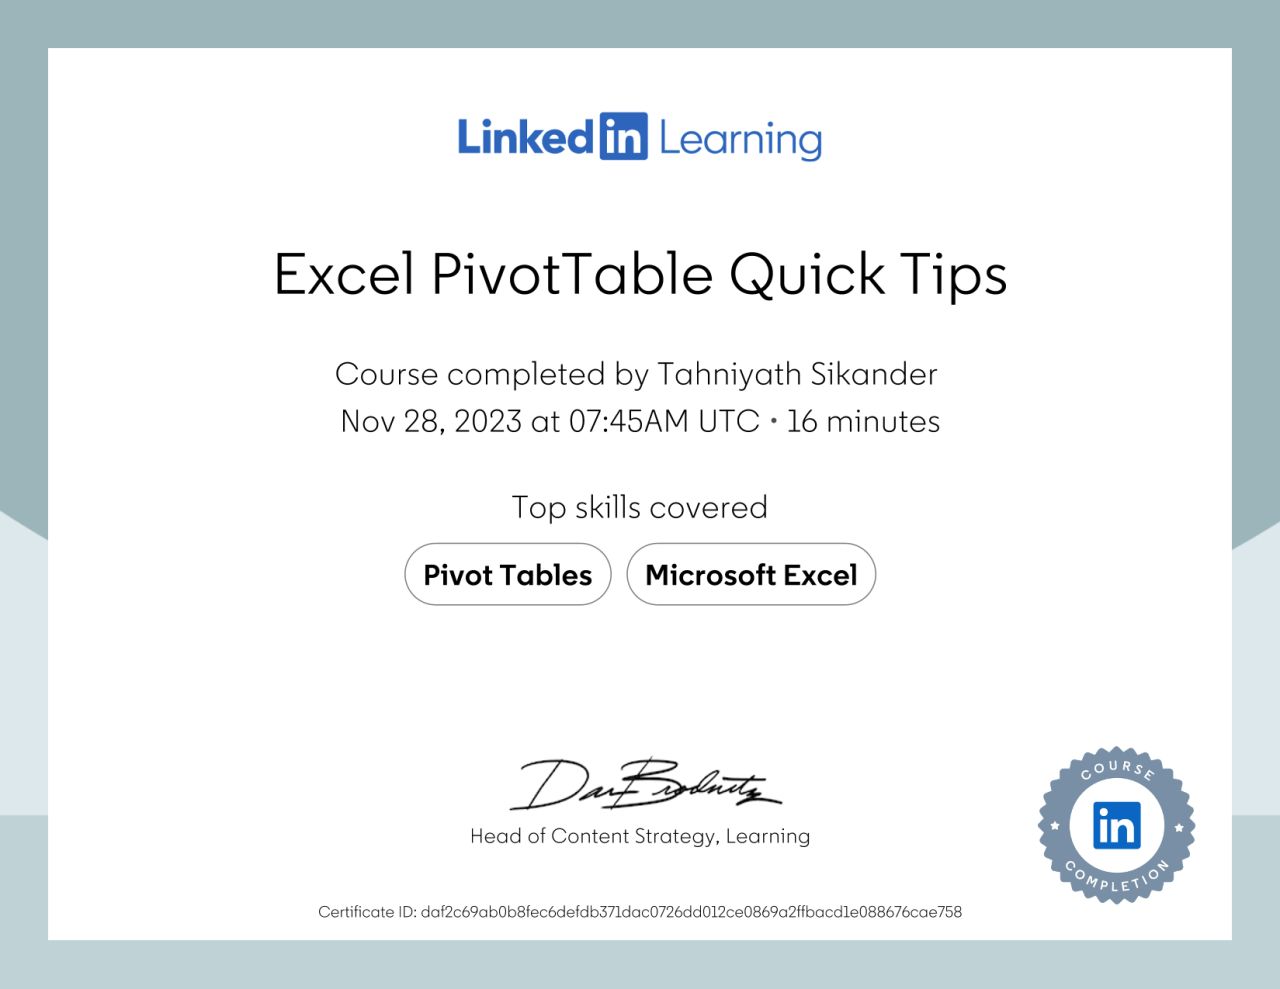 Certificate of completion for Excel PivotTable Quick Tips content earned by Tahniyath Sikander